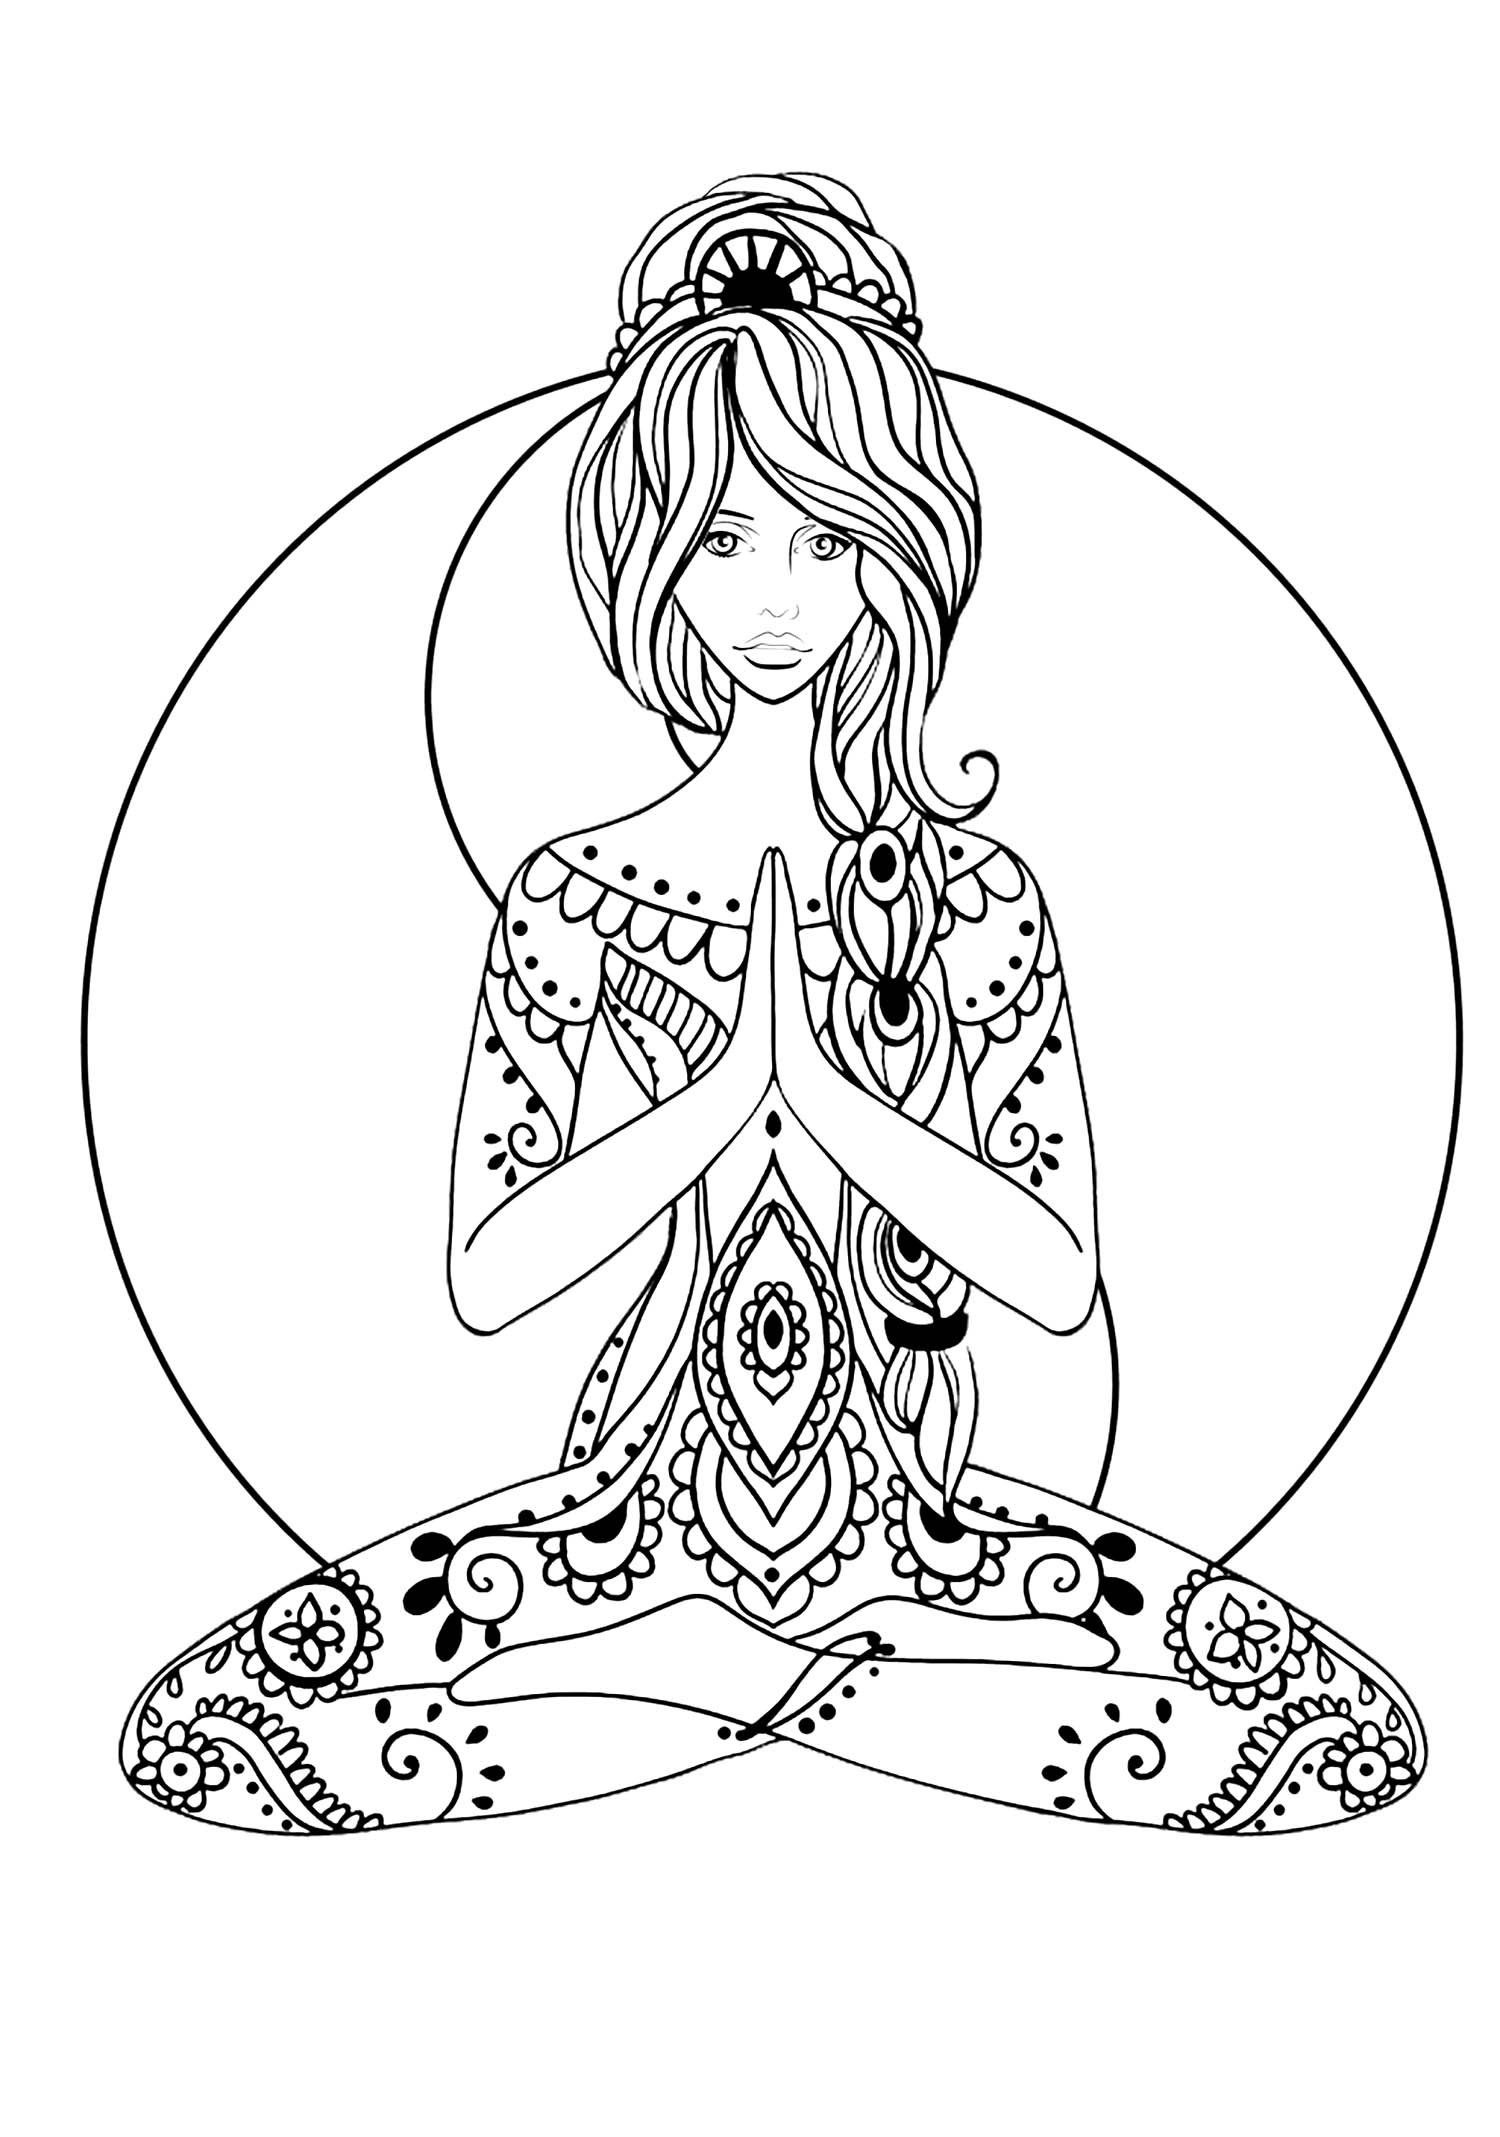 Download Yoga - Anti stress Adult Coloring Pages